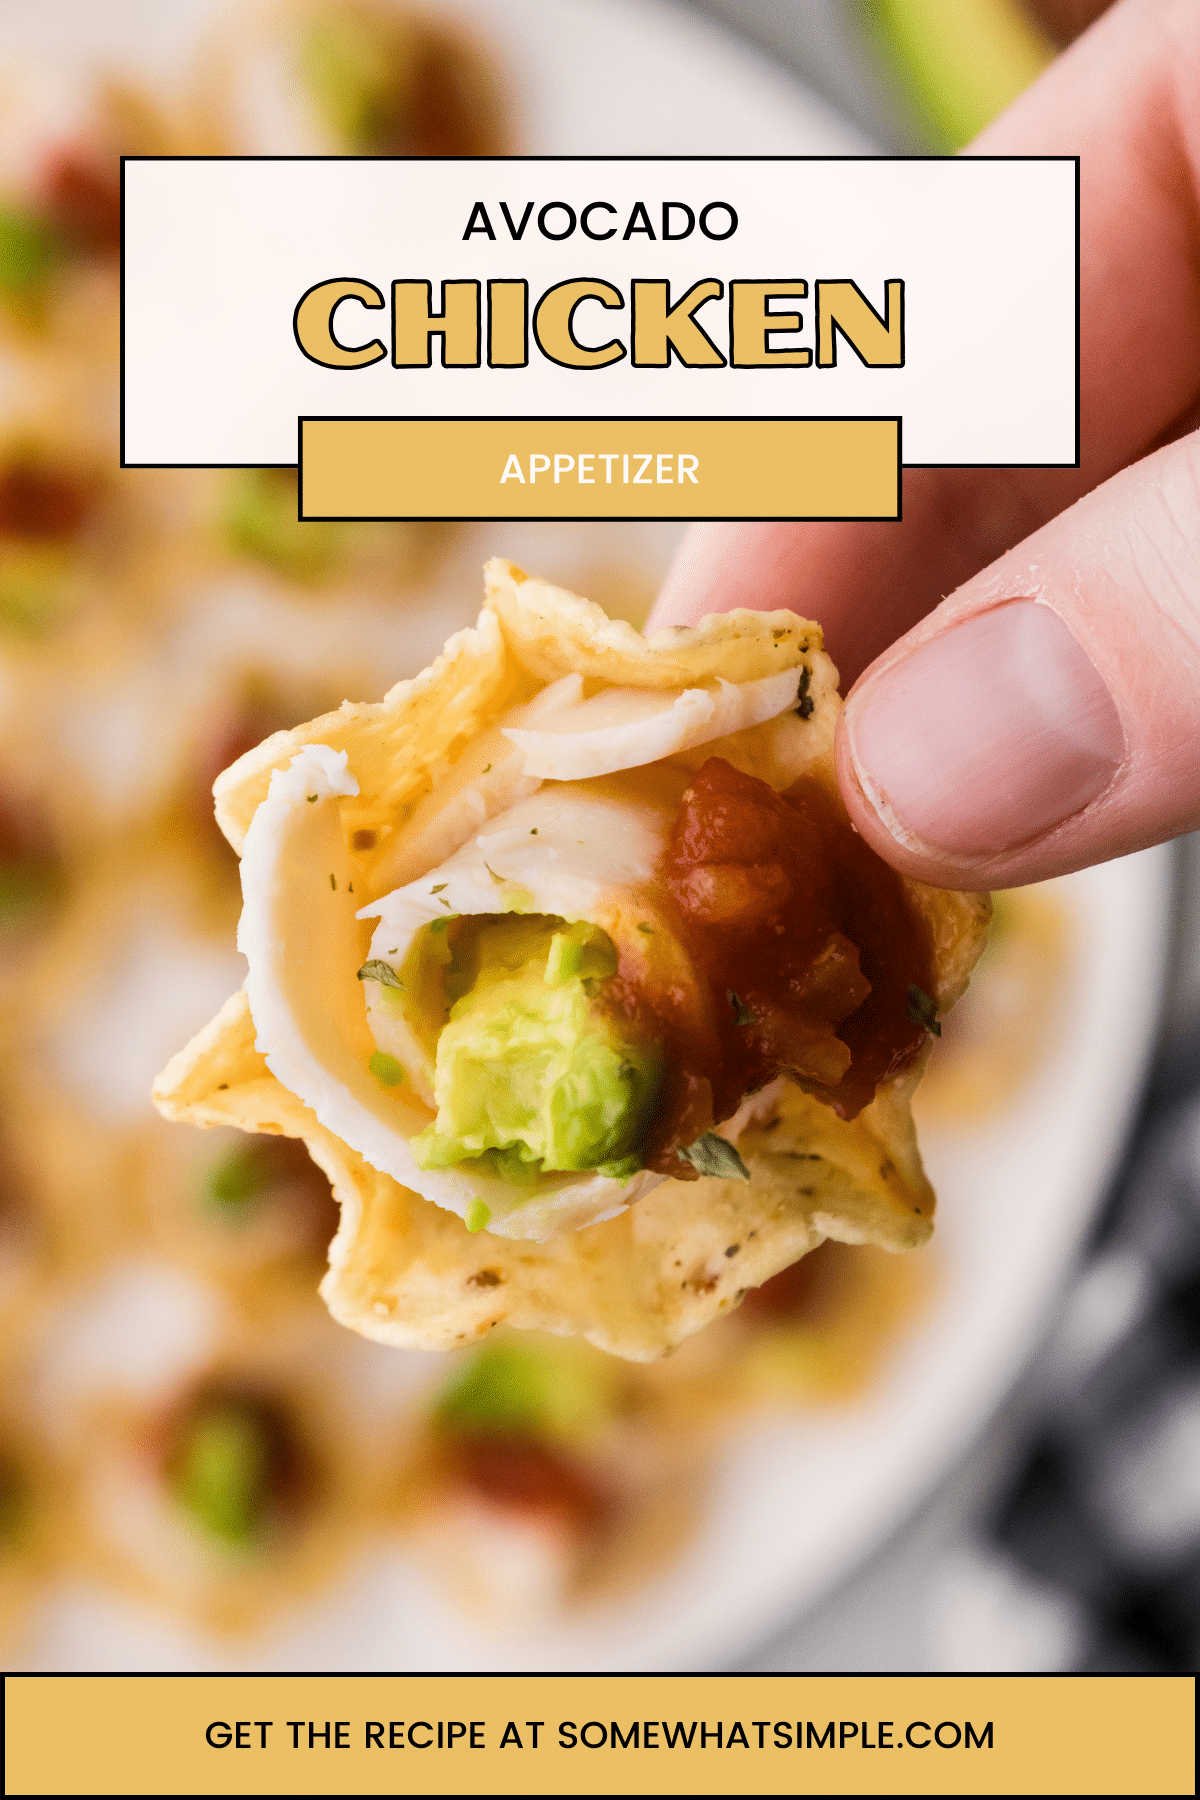 Chicken Avocado Appetizer Cups are delicious appetizers or afternoon snacks that are super tasty and so easy to prepare! via @somewhatsimple